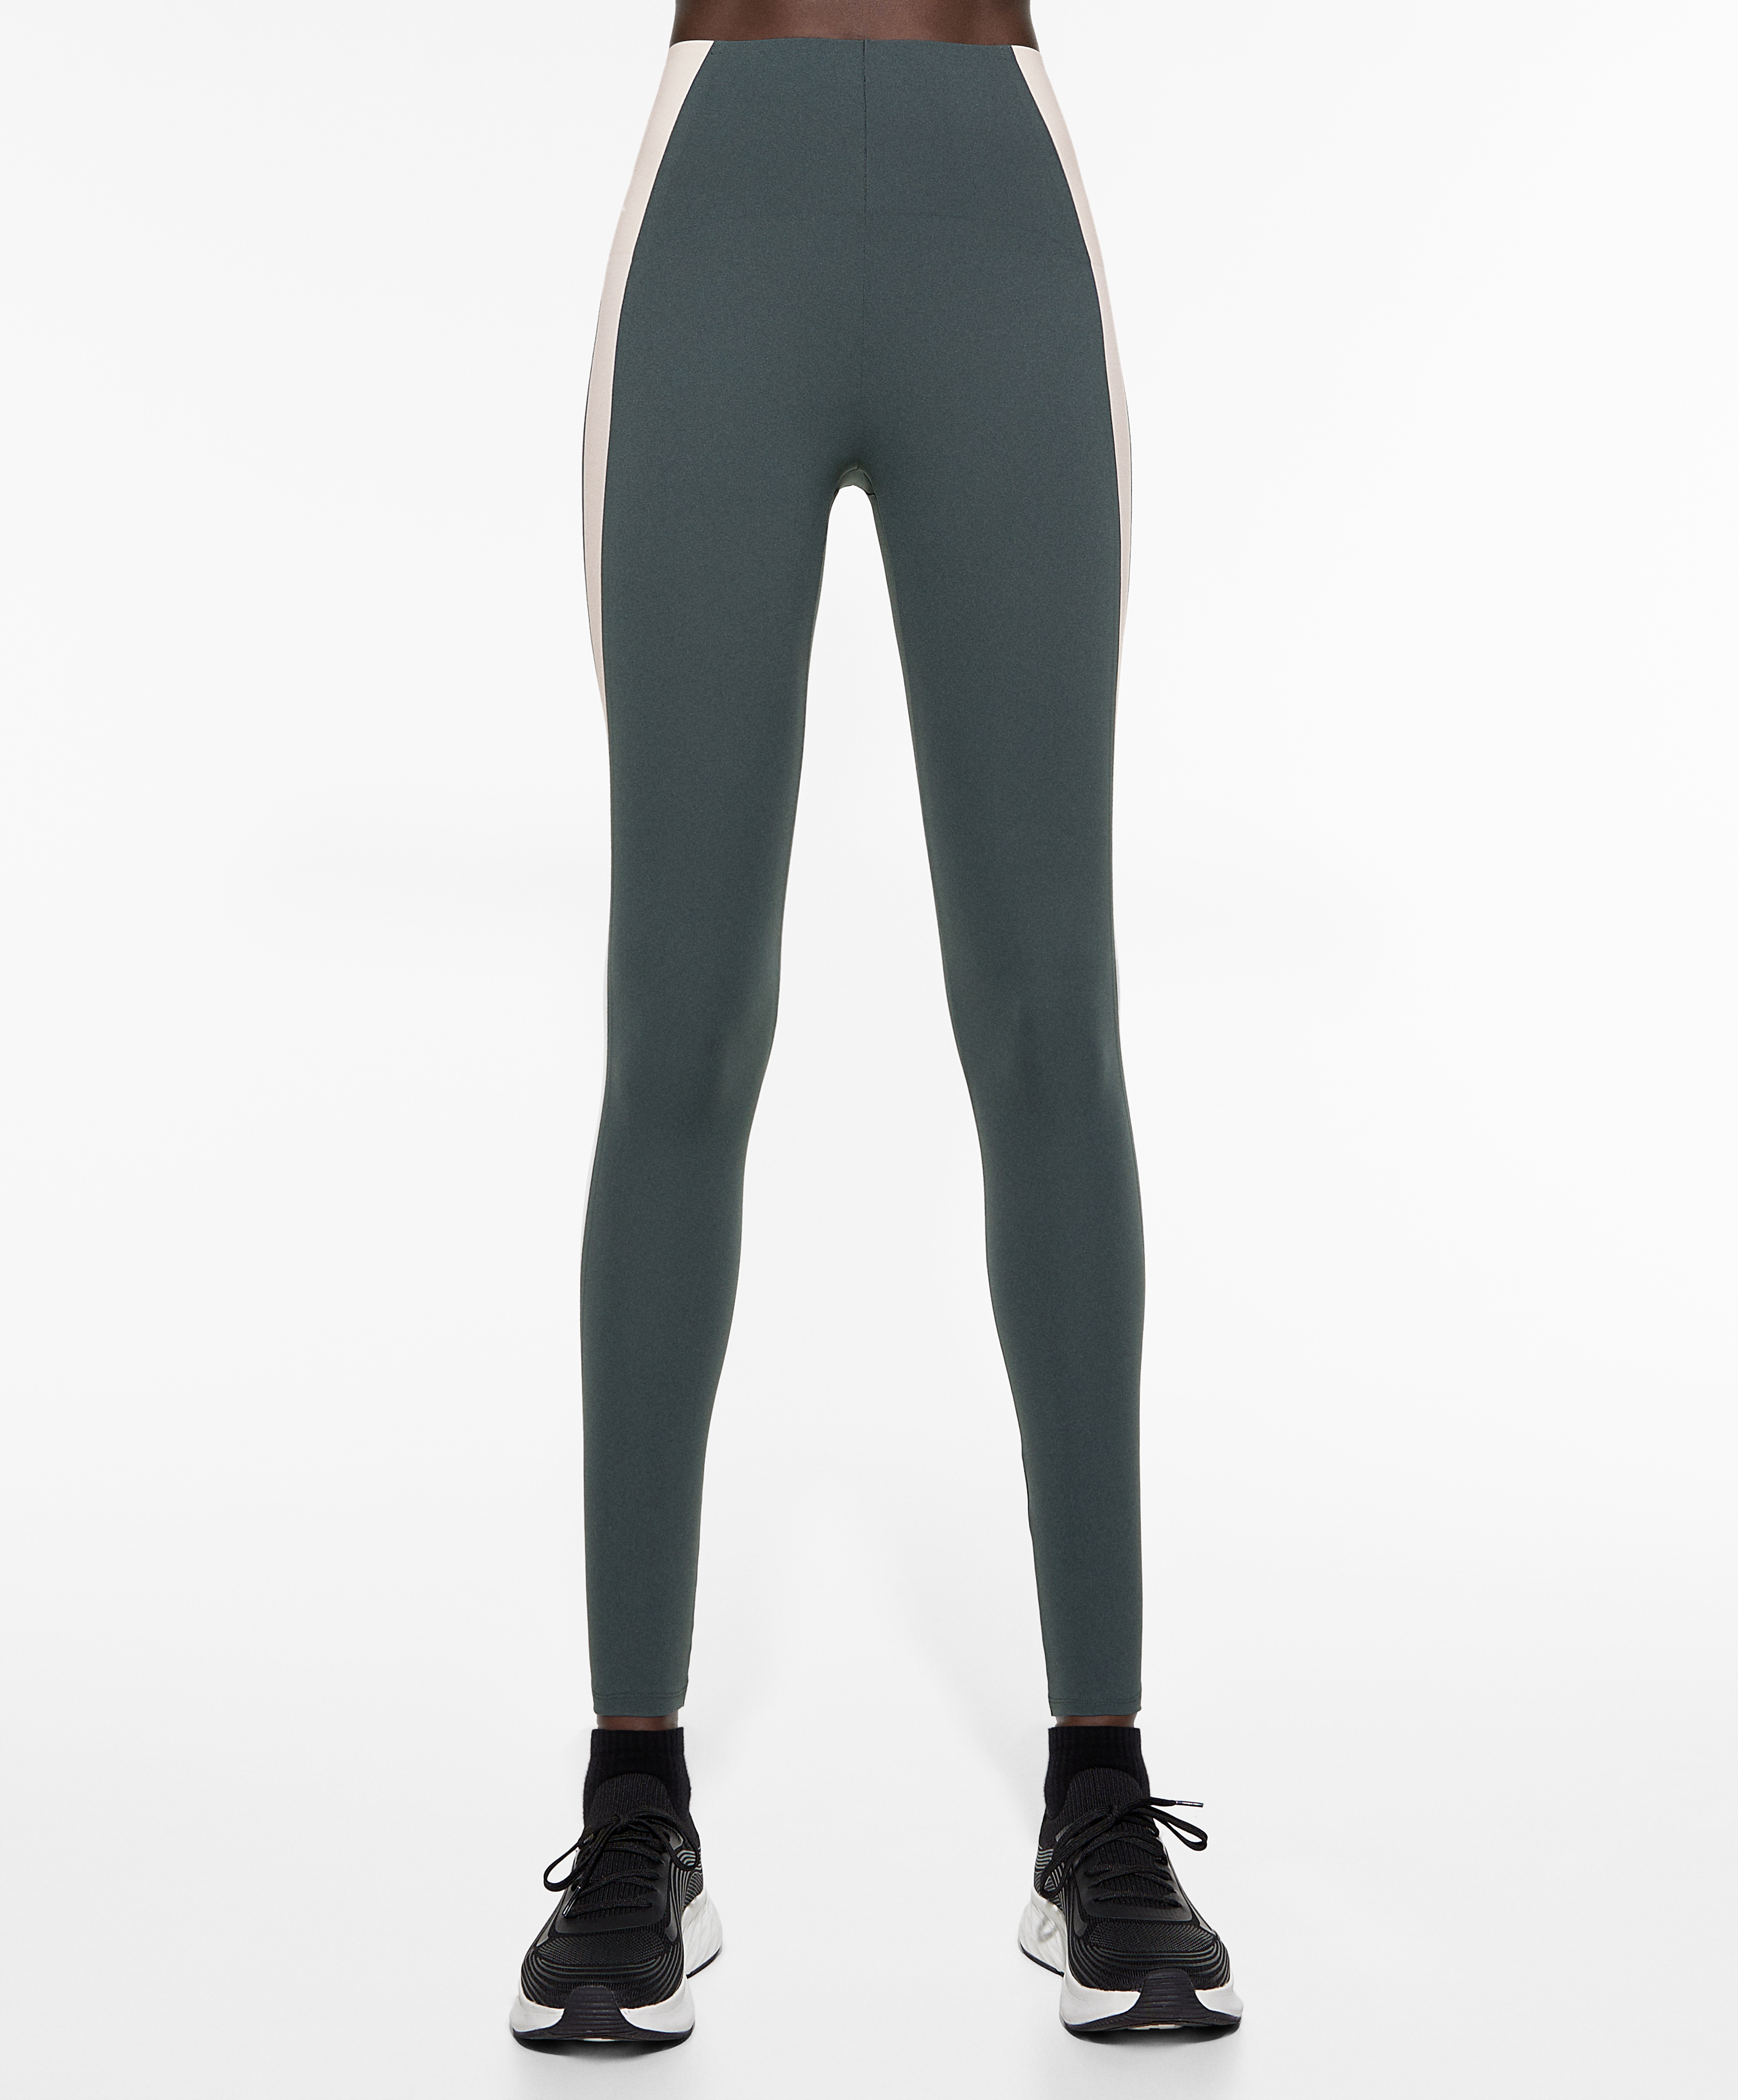 BALANCE COLLECTION LEGGINGS Women's Small Gray Stretch Pull-on Pants £11.95  - PicClick UK